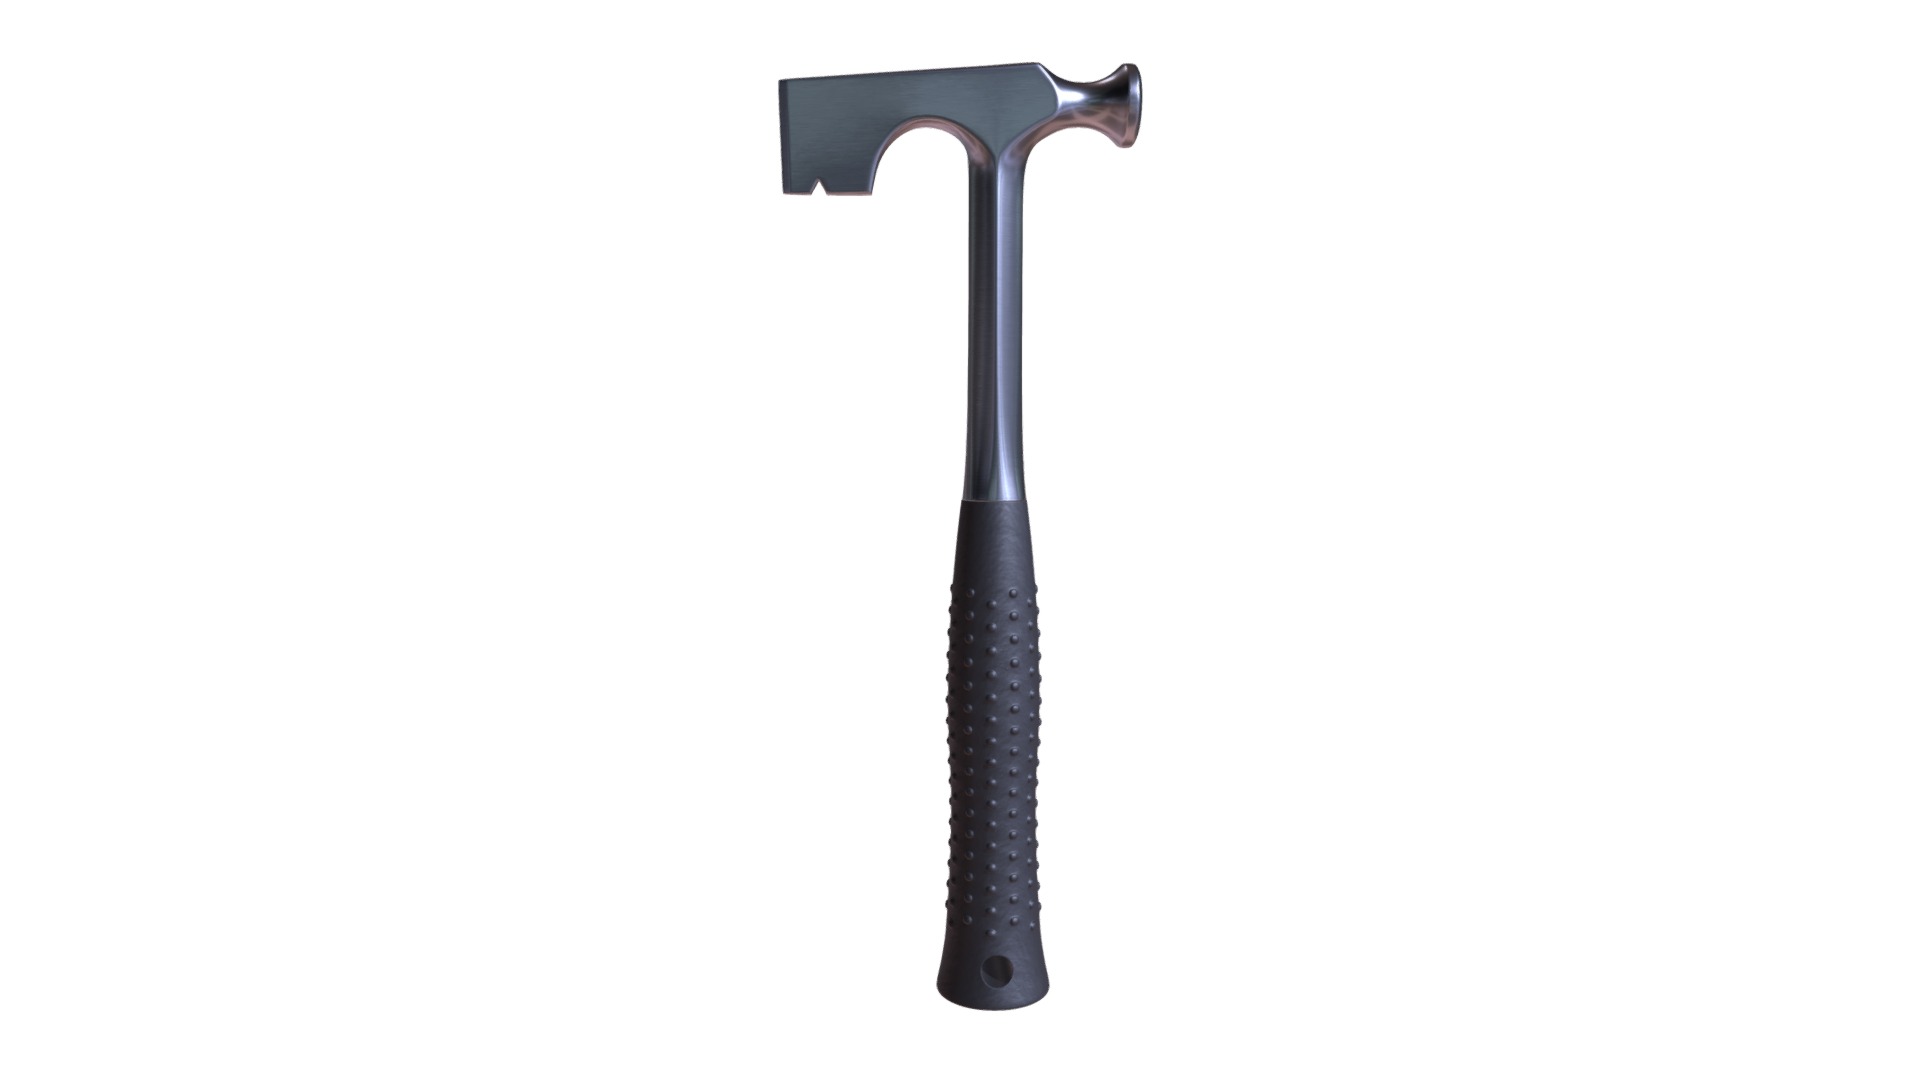 3D model sledge hammer - This is a 3D model of the sledge hammer. The 3D model is about a black and silver vacuum cleaner.